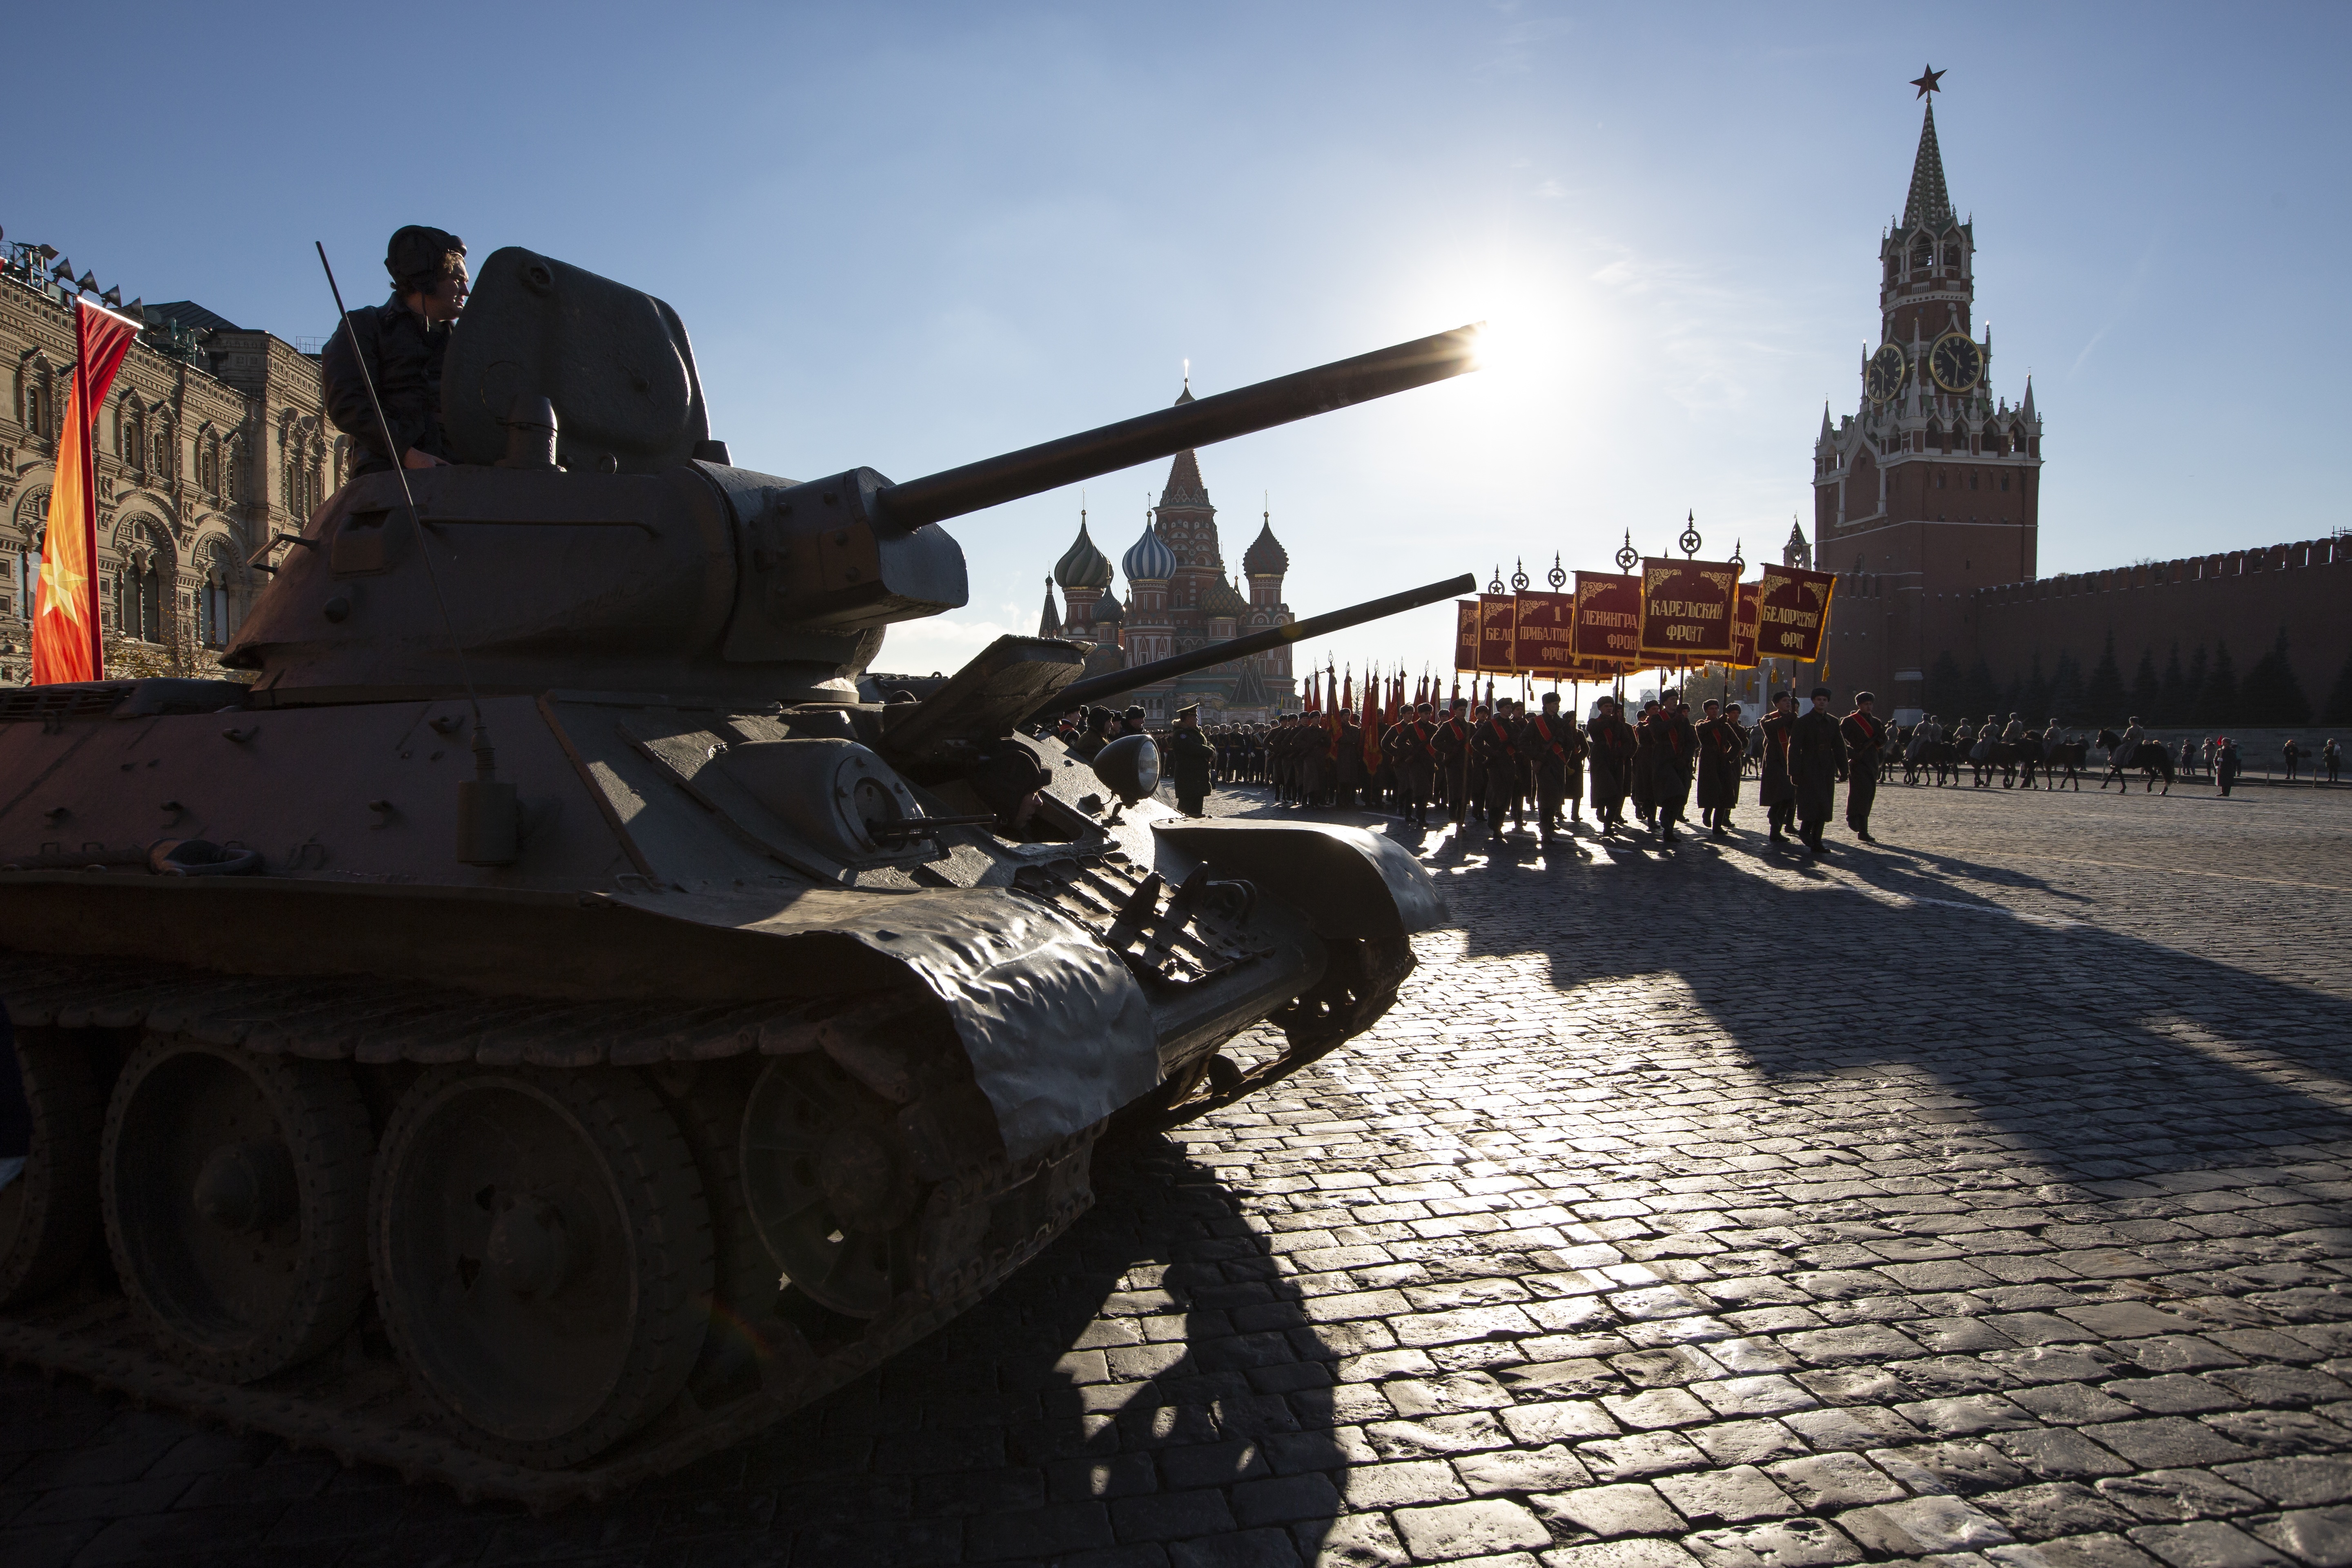 Russian soldiers dressed in Red Army World War II uniforms march during a rehearsal of the Nov. 7 parade in Red Square, with St. Basil Cathedral and the Spasskaya Tower in the background, in Moscow, Russia, Monday, Nov. 5, 2018. The parade marks the 77th anniversary of a World War II historic parade in Red Square and honored the participants in the Nov. 7, 1941 parade who headed directly to the front lines to defend Moscow from the Nazi forces. (AP Photo/Alexander Zemlianichenko)